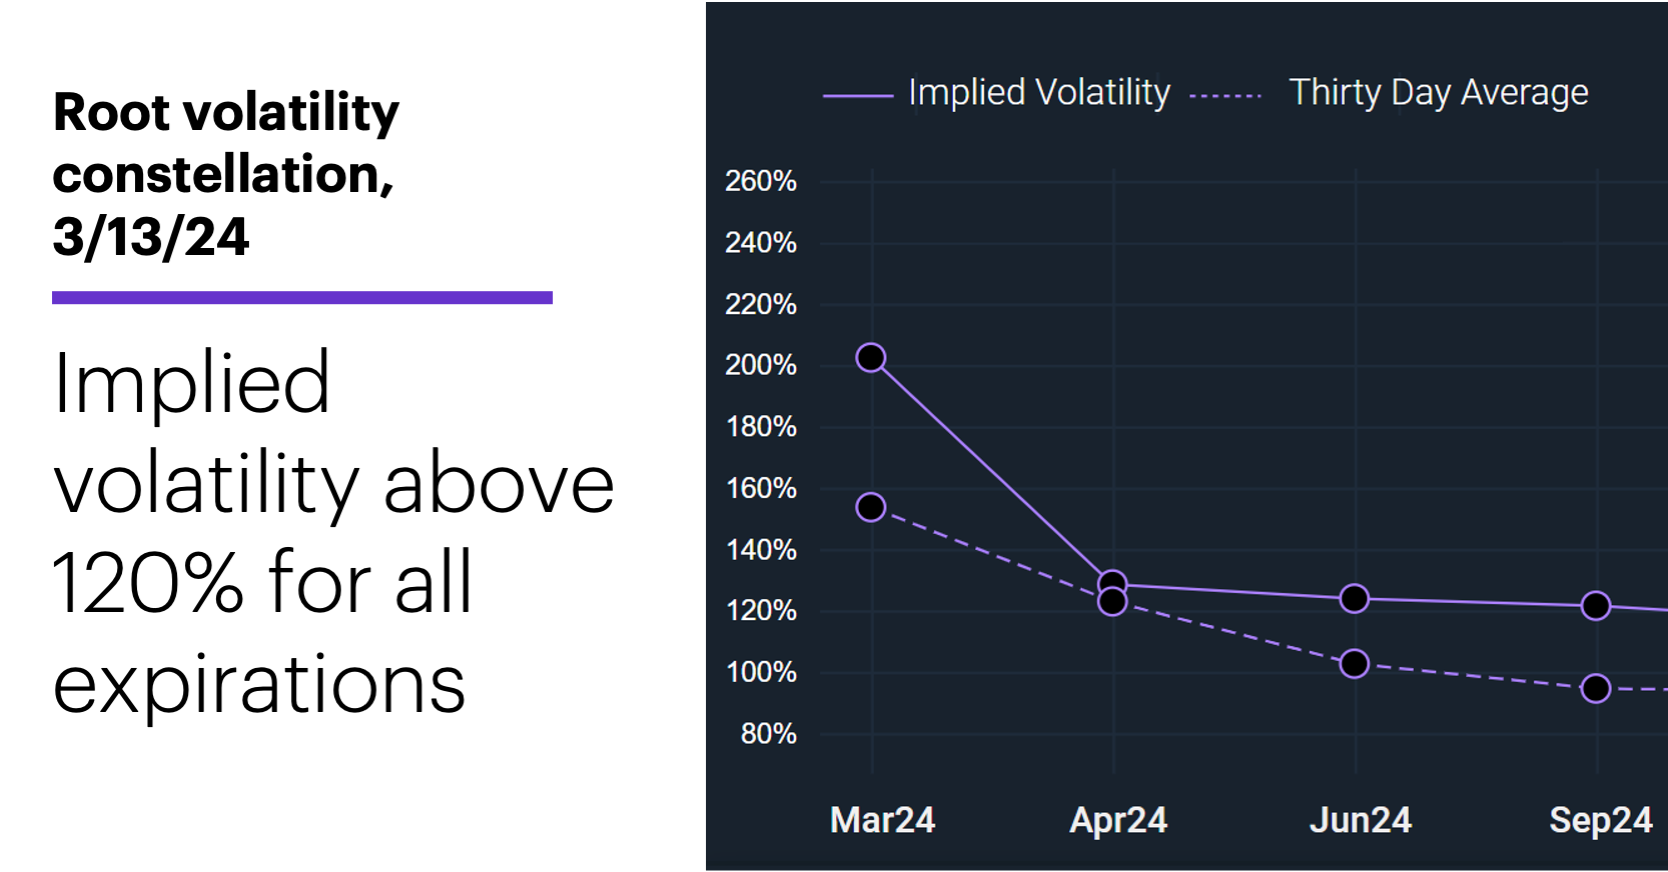 Chart 2: Root volatility constellation, 3/13/24. Implied volatility above 120% for all expirations.